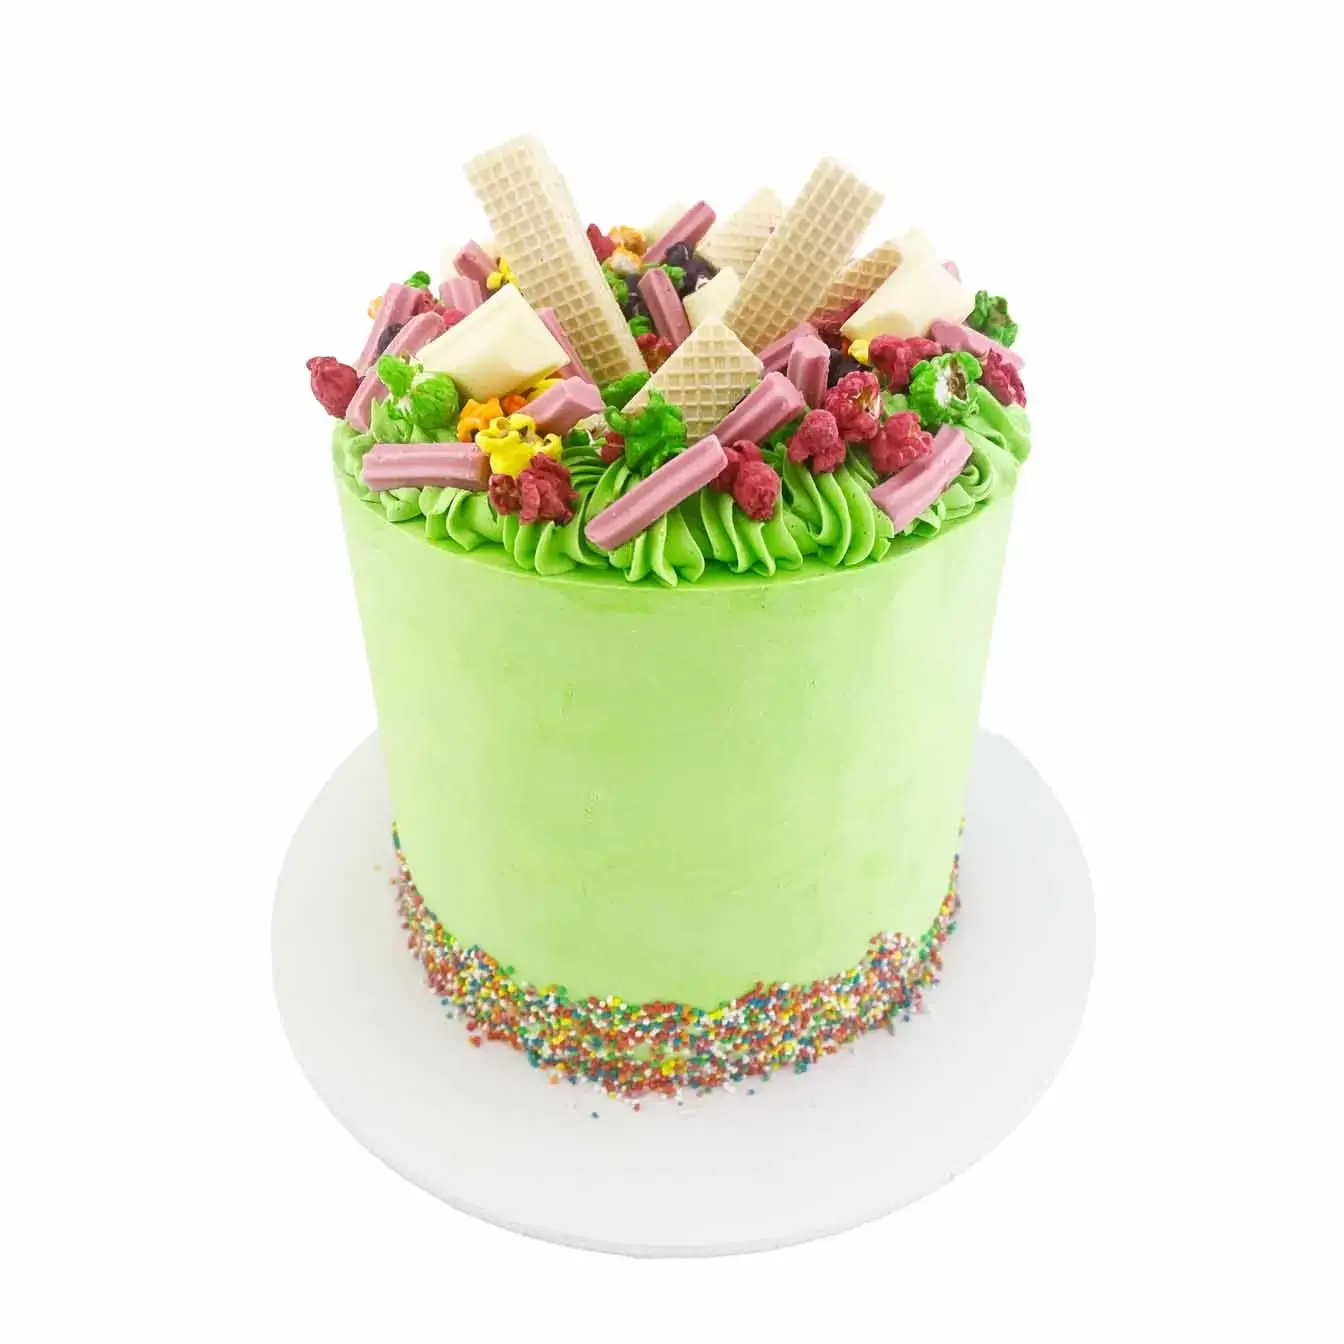 Rainbow popcorn cake with layers of colourful popcorn, musk sticks, vanilla wafers, and white chocolate, topped with whipped ganache and more white chocolate